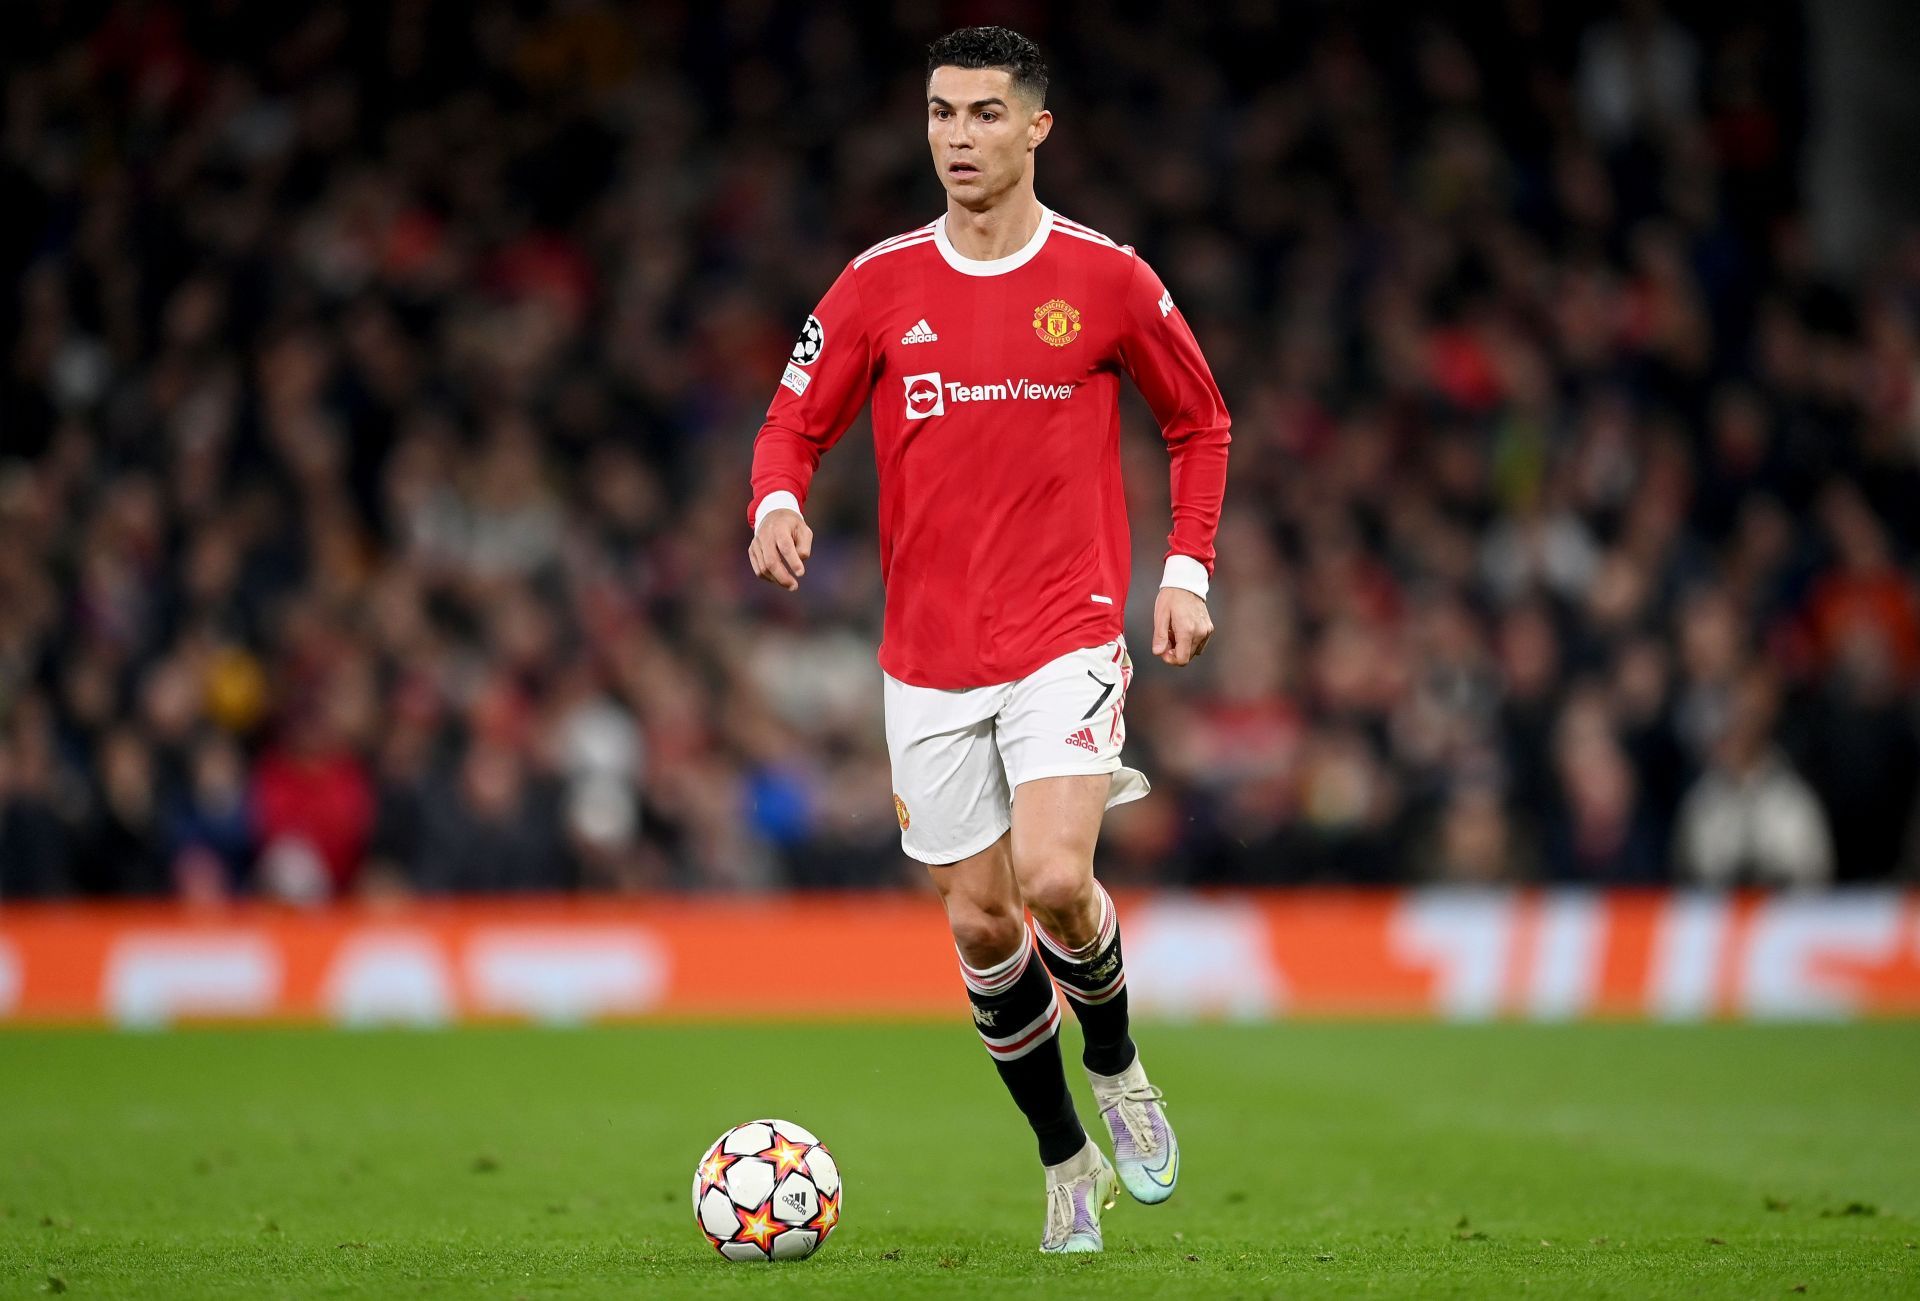 Ronaldo in action for Manchester United